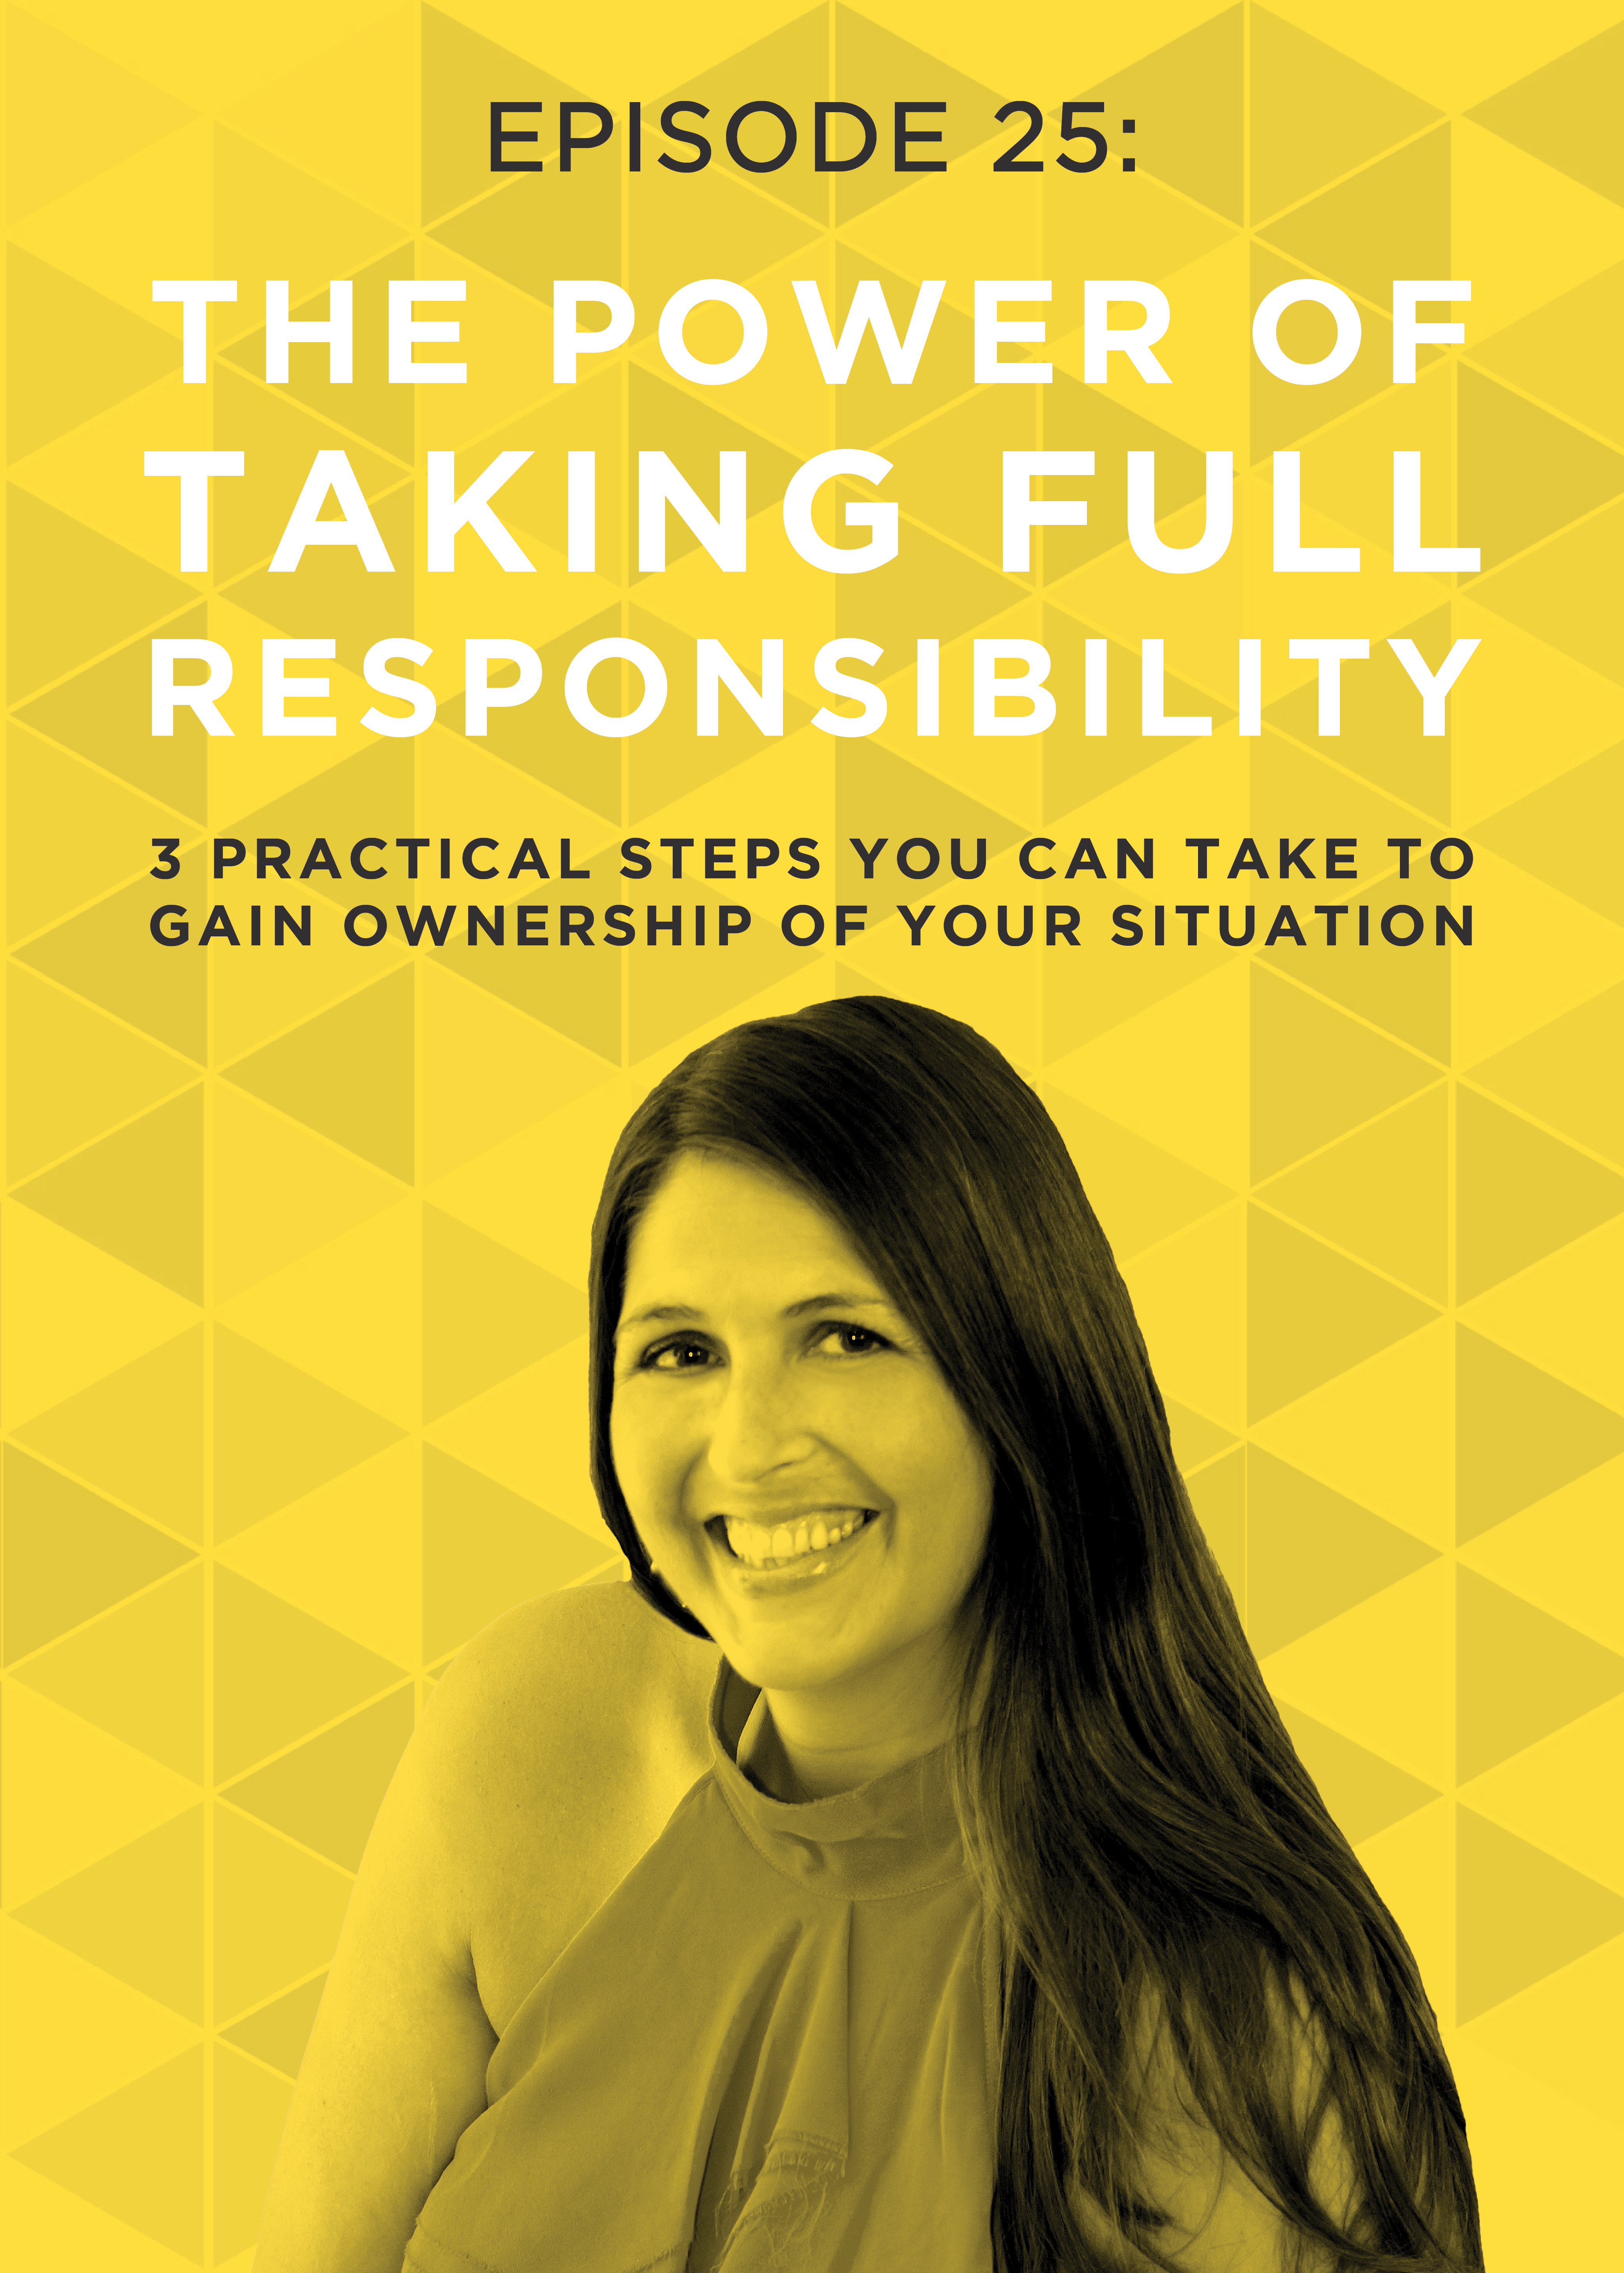 EP 25: The Power of Taking Full Responsibility